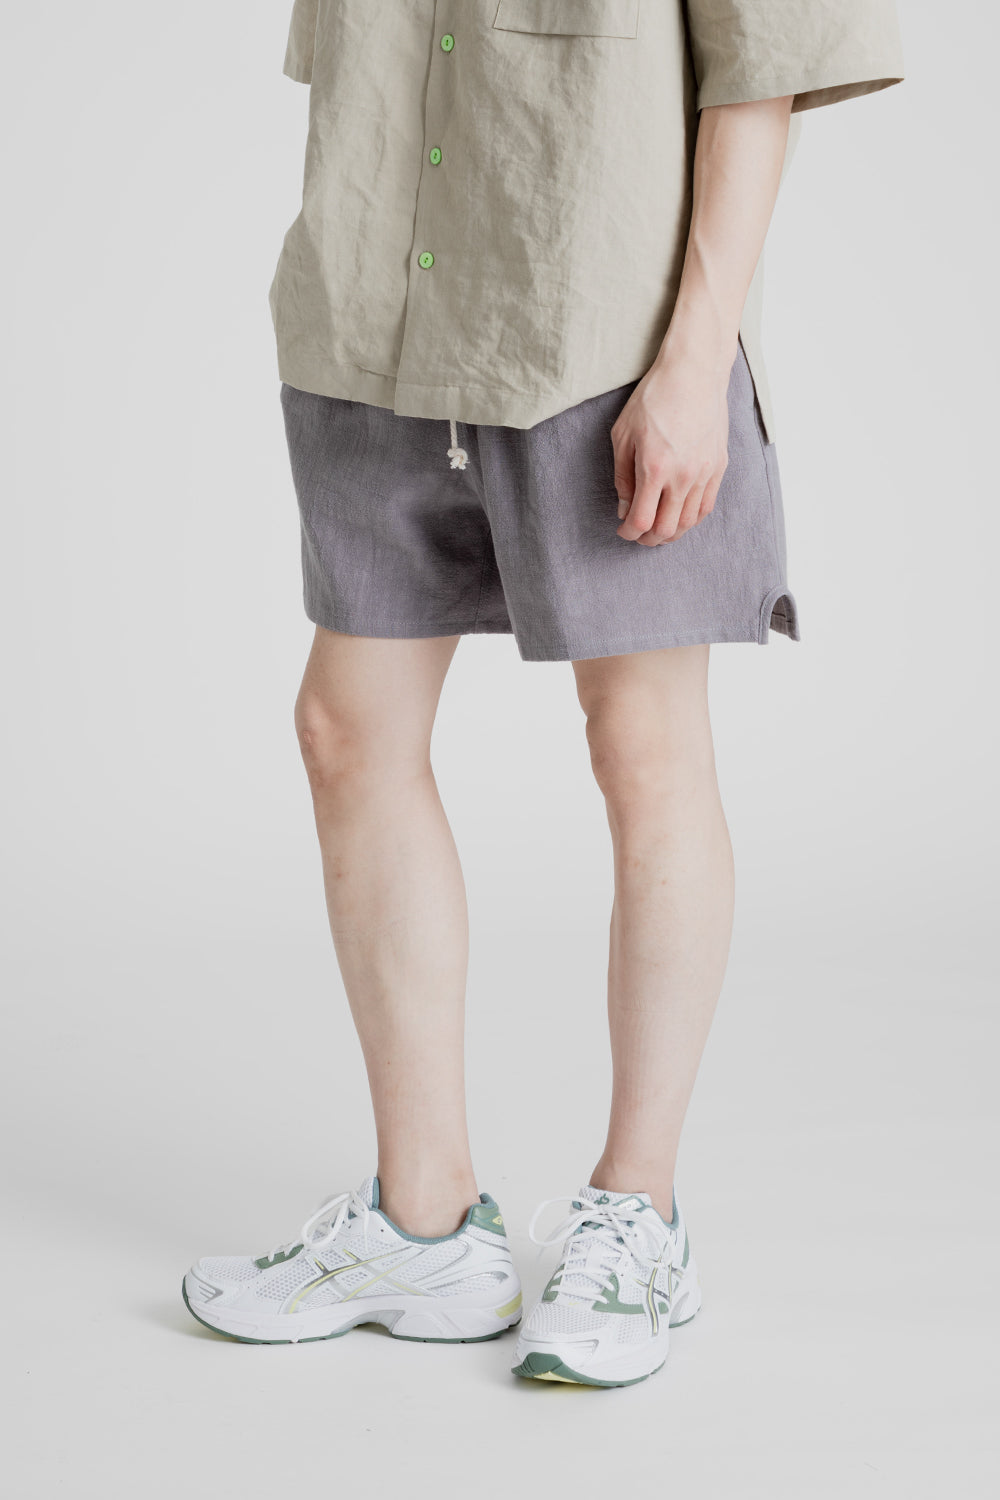 S.K Manor Hill MT Shorts in Grey Ramie